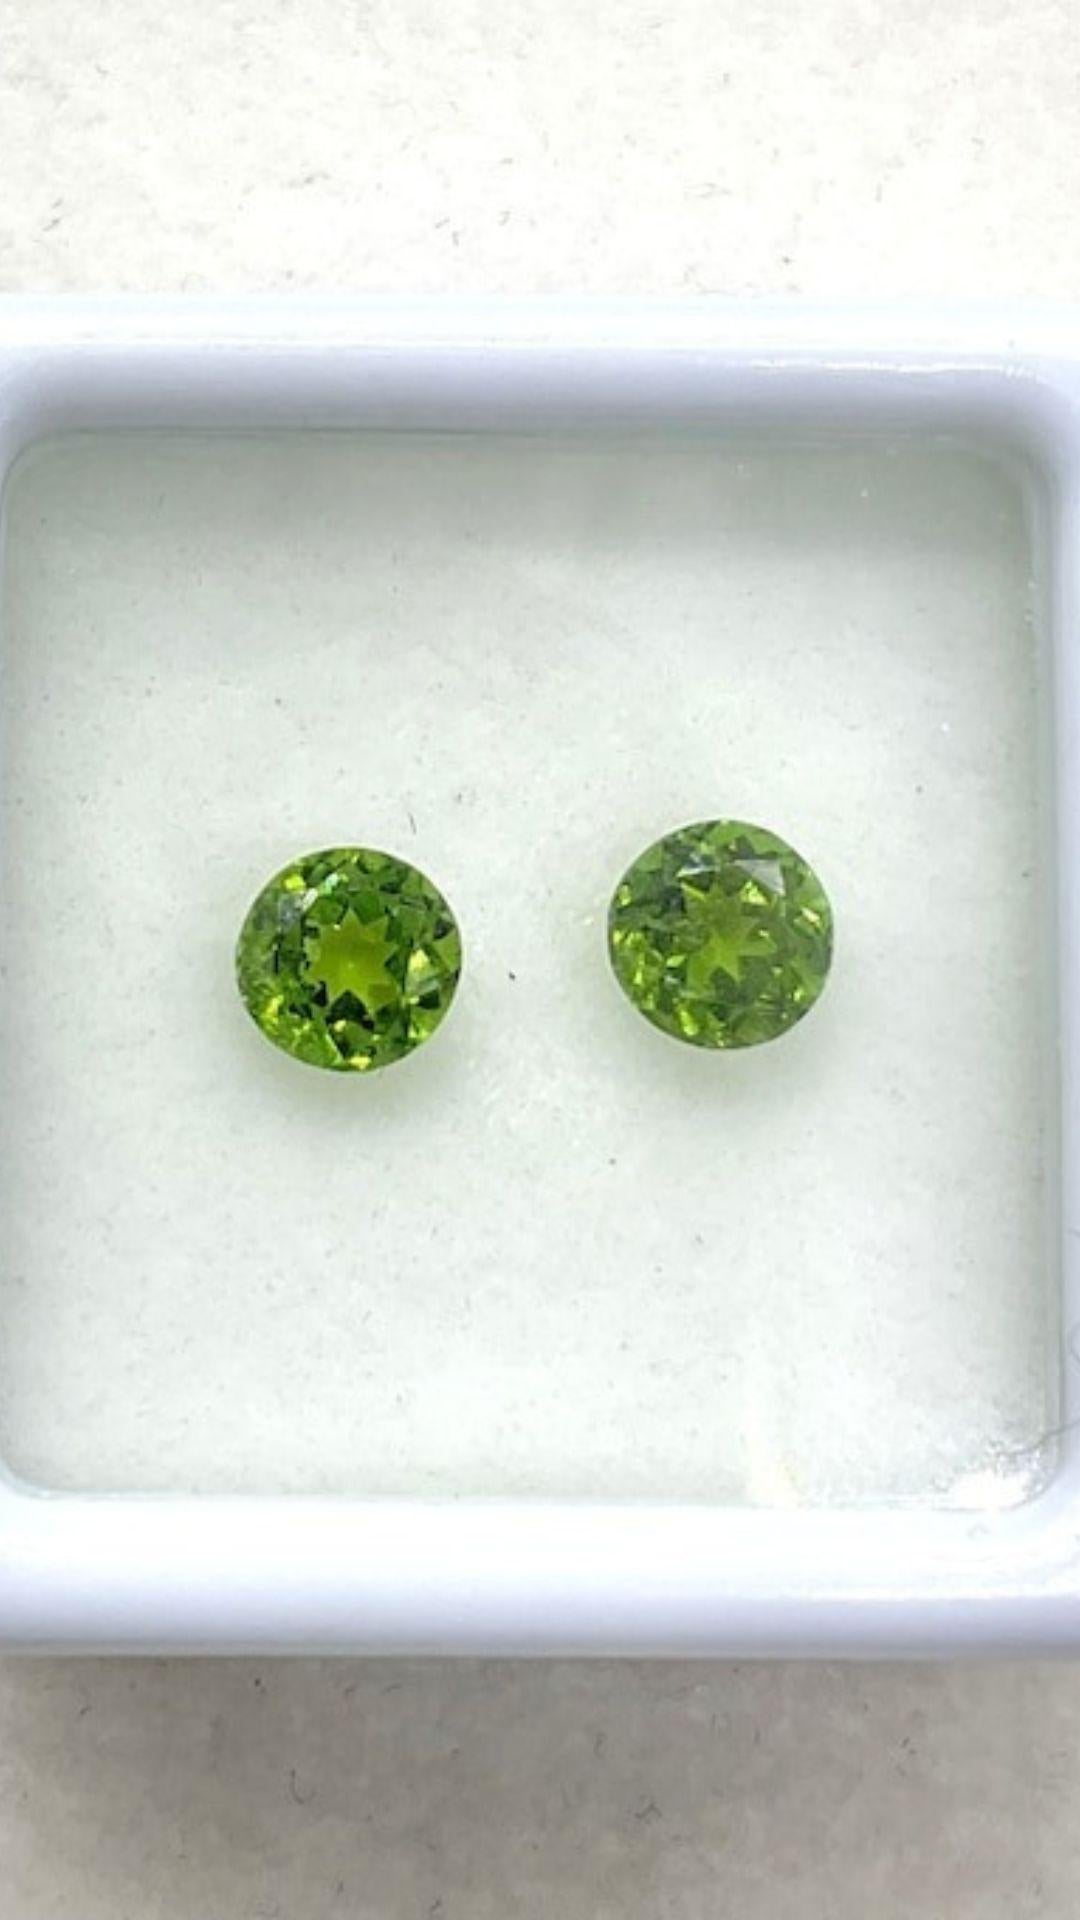 Gemstone - Tourmaline
Weight- 1.20 Carats
Shape - round
Size - 5 MM
Pieces - 2
Drill- Not Drilled